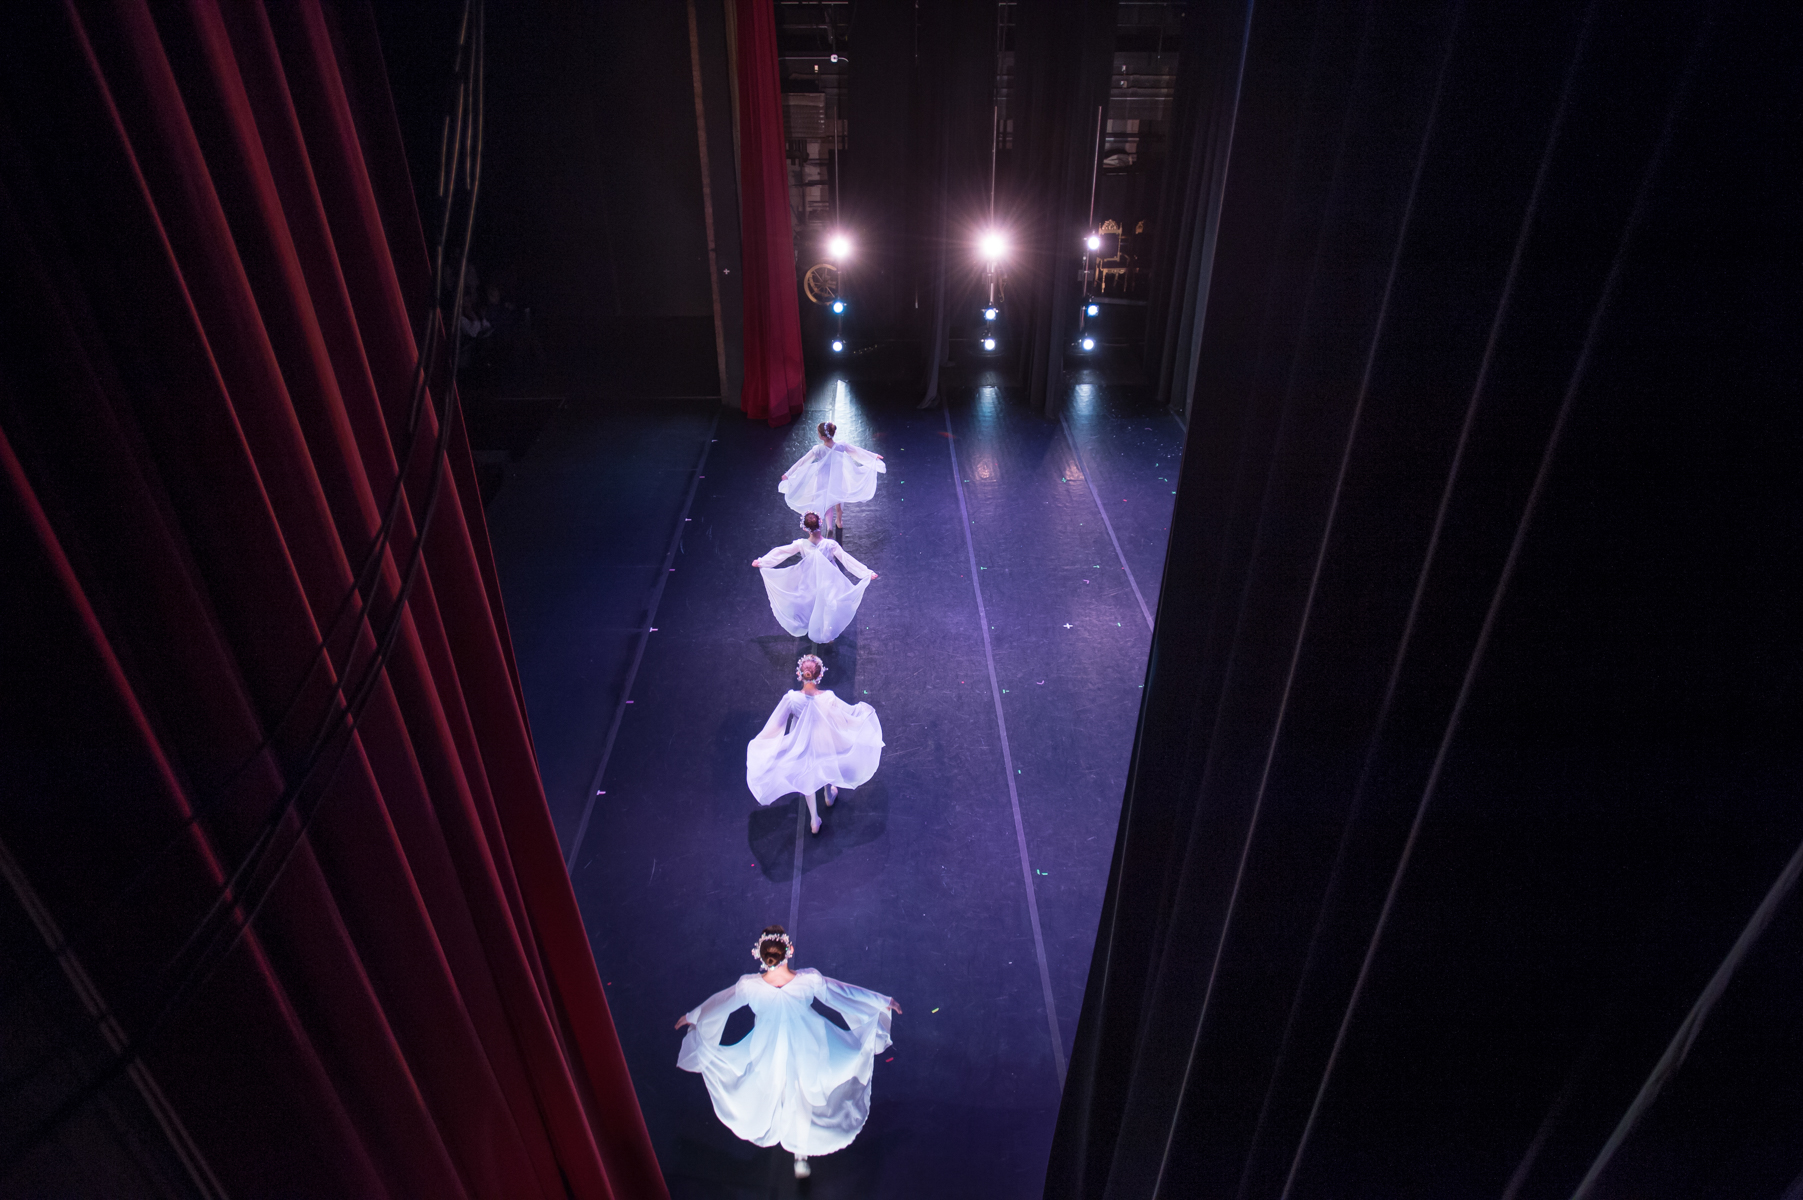 St. Paul Ballet students prepare for the final bow after a performance of Clara’s Dream, on December 21, 2014 in St. Paul, MN.